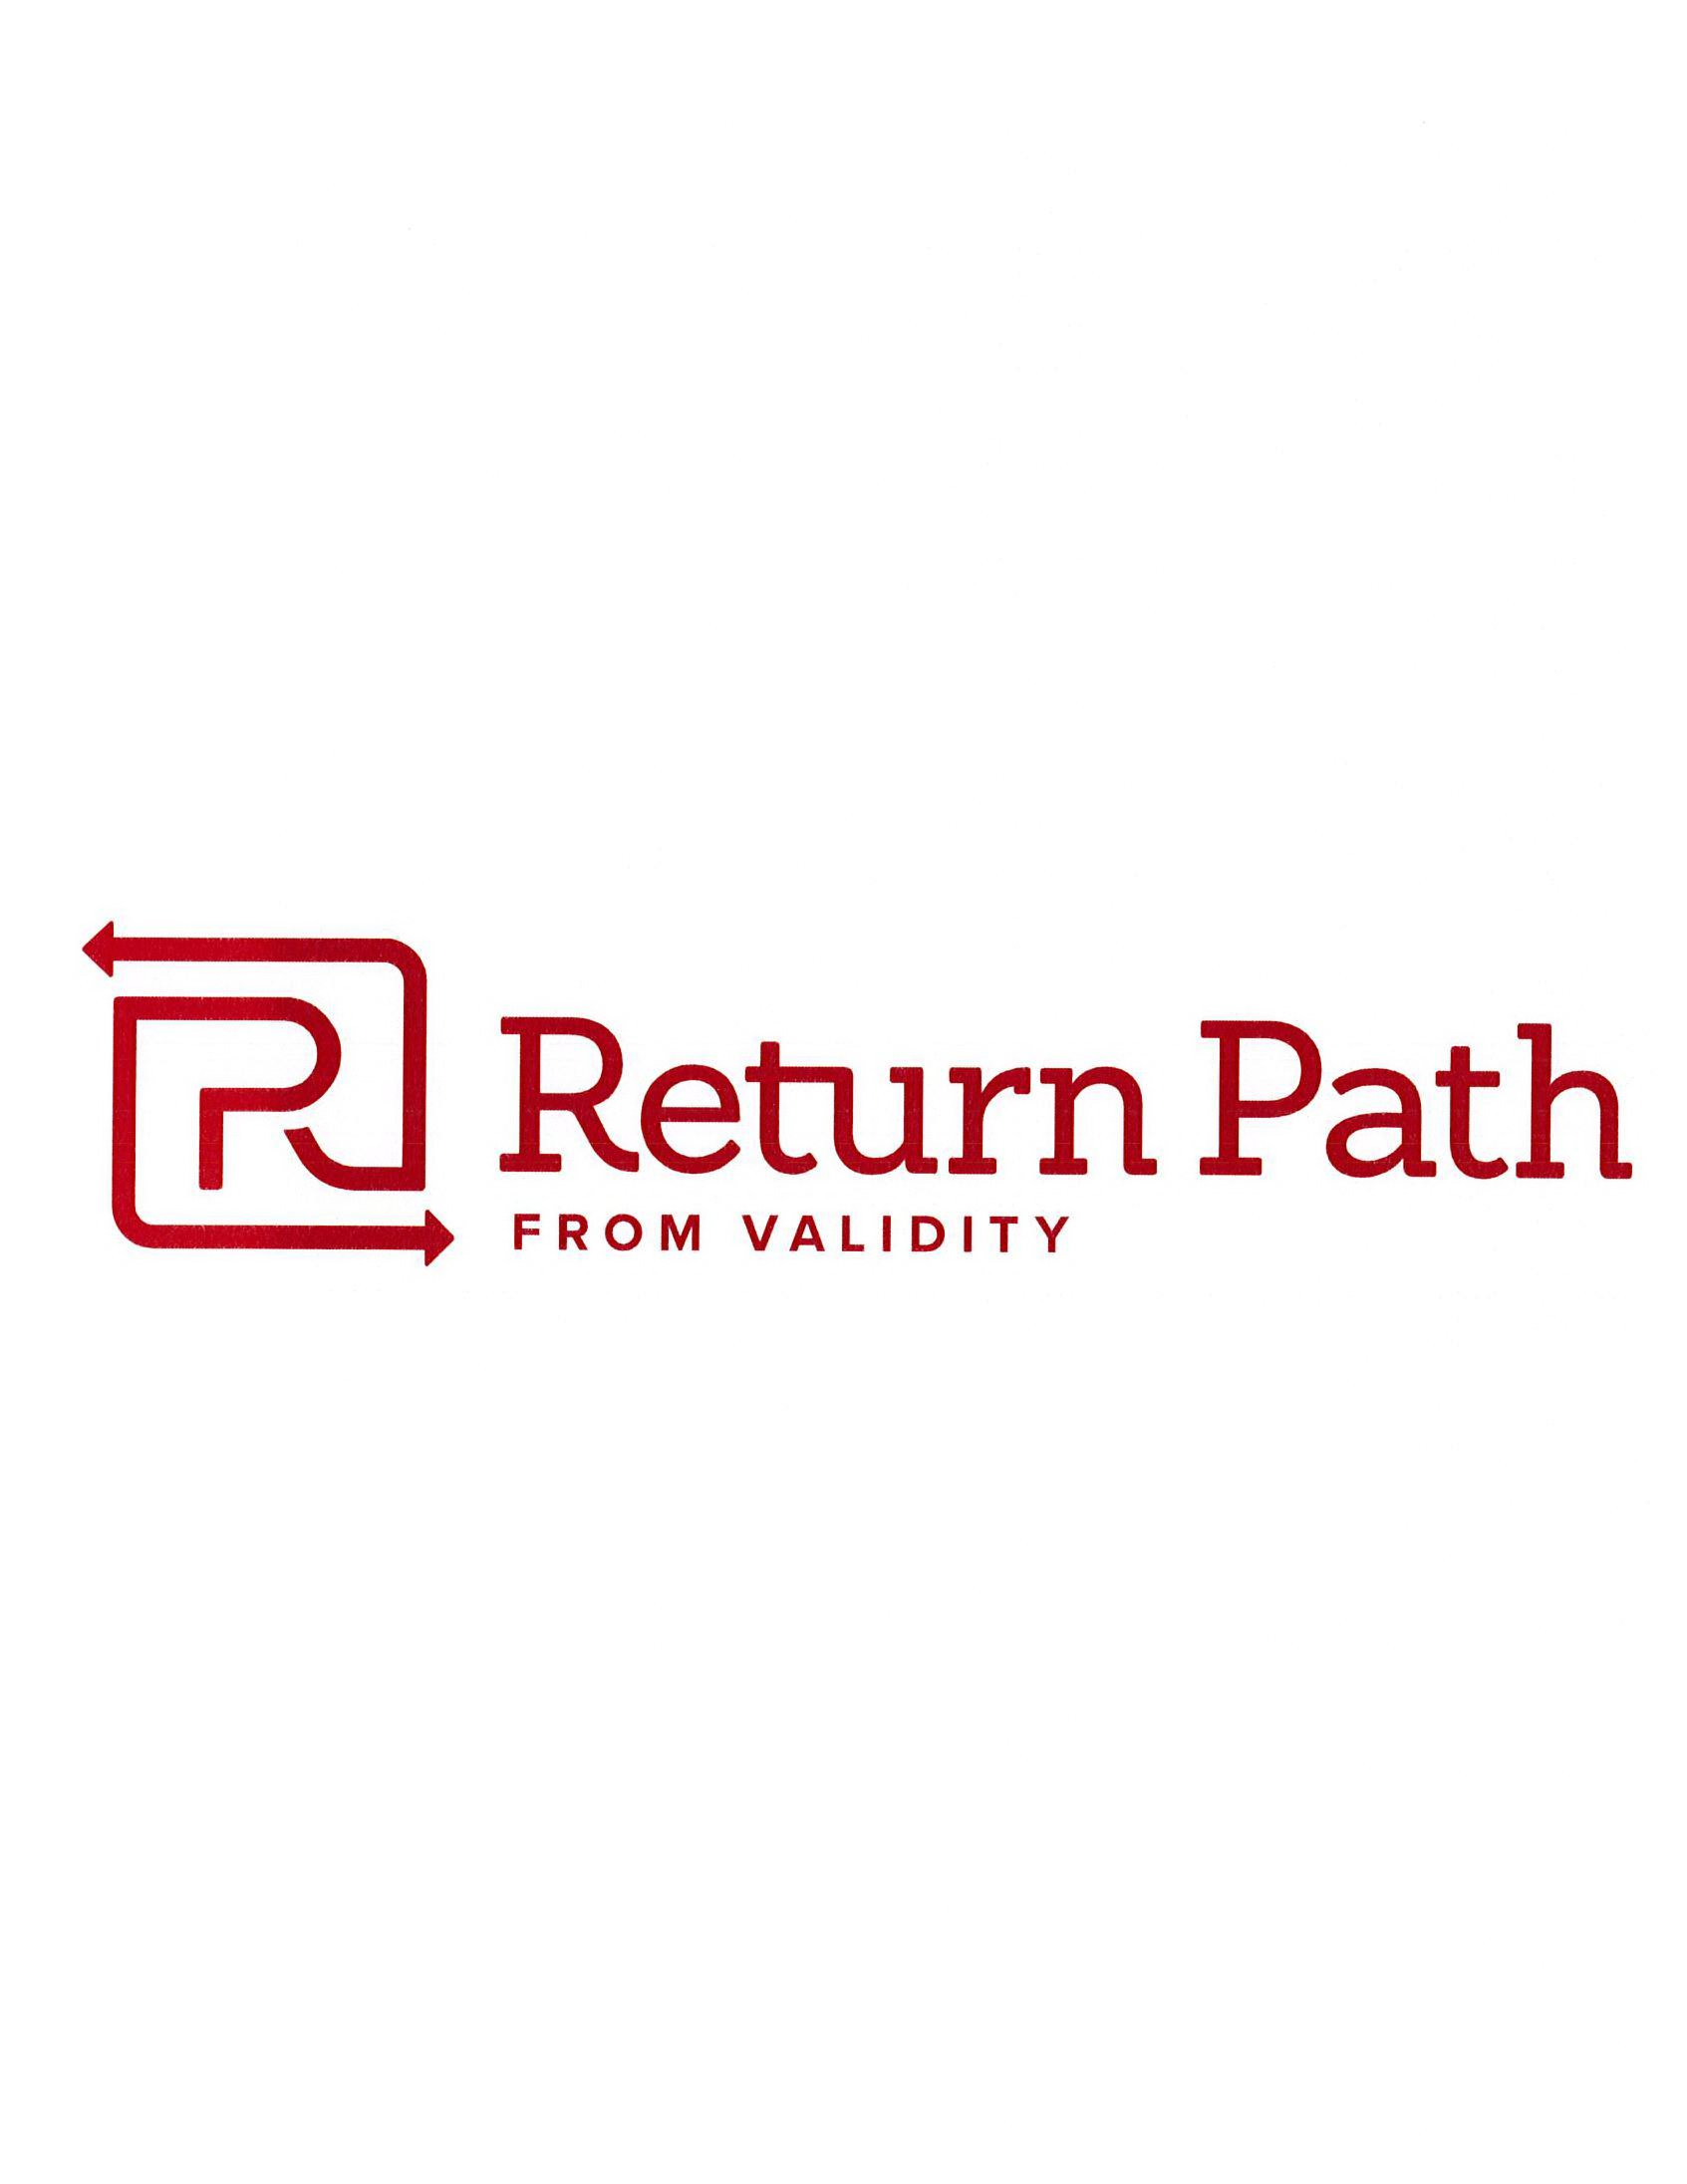  RP RETURN PATH FROM VALIDITY